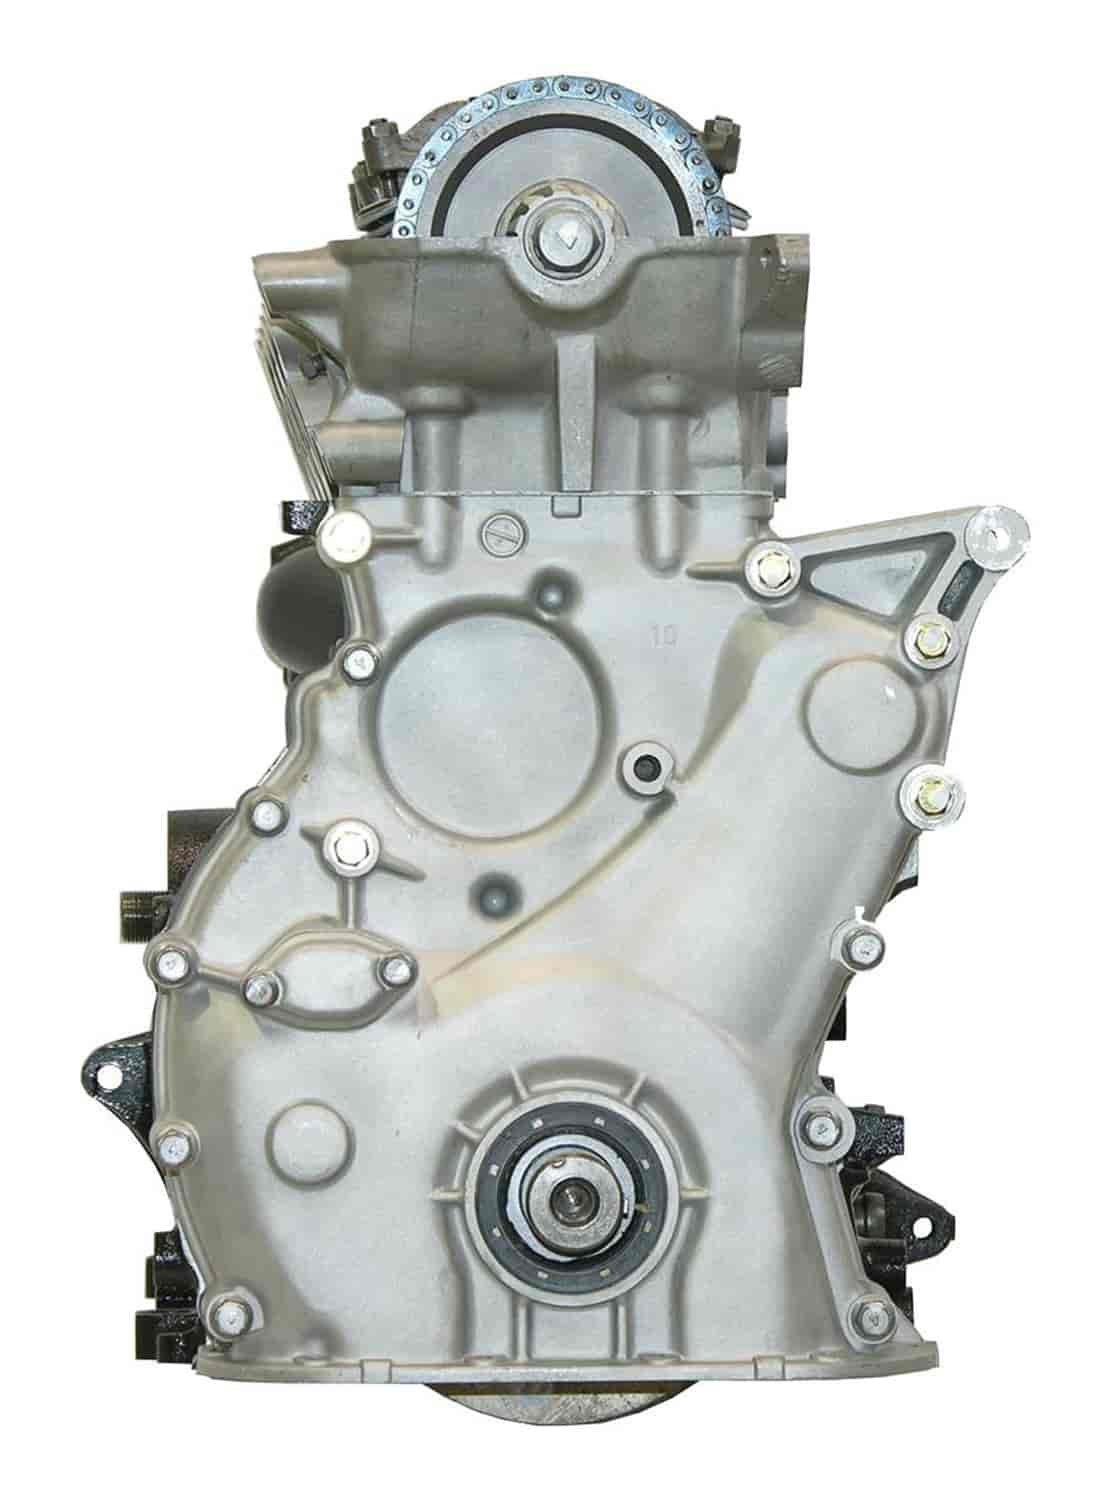 Remanufactured Crate Engine for 1981-1987 Chrysler, Dodge, & Plymouth with 2.6L L4